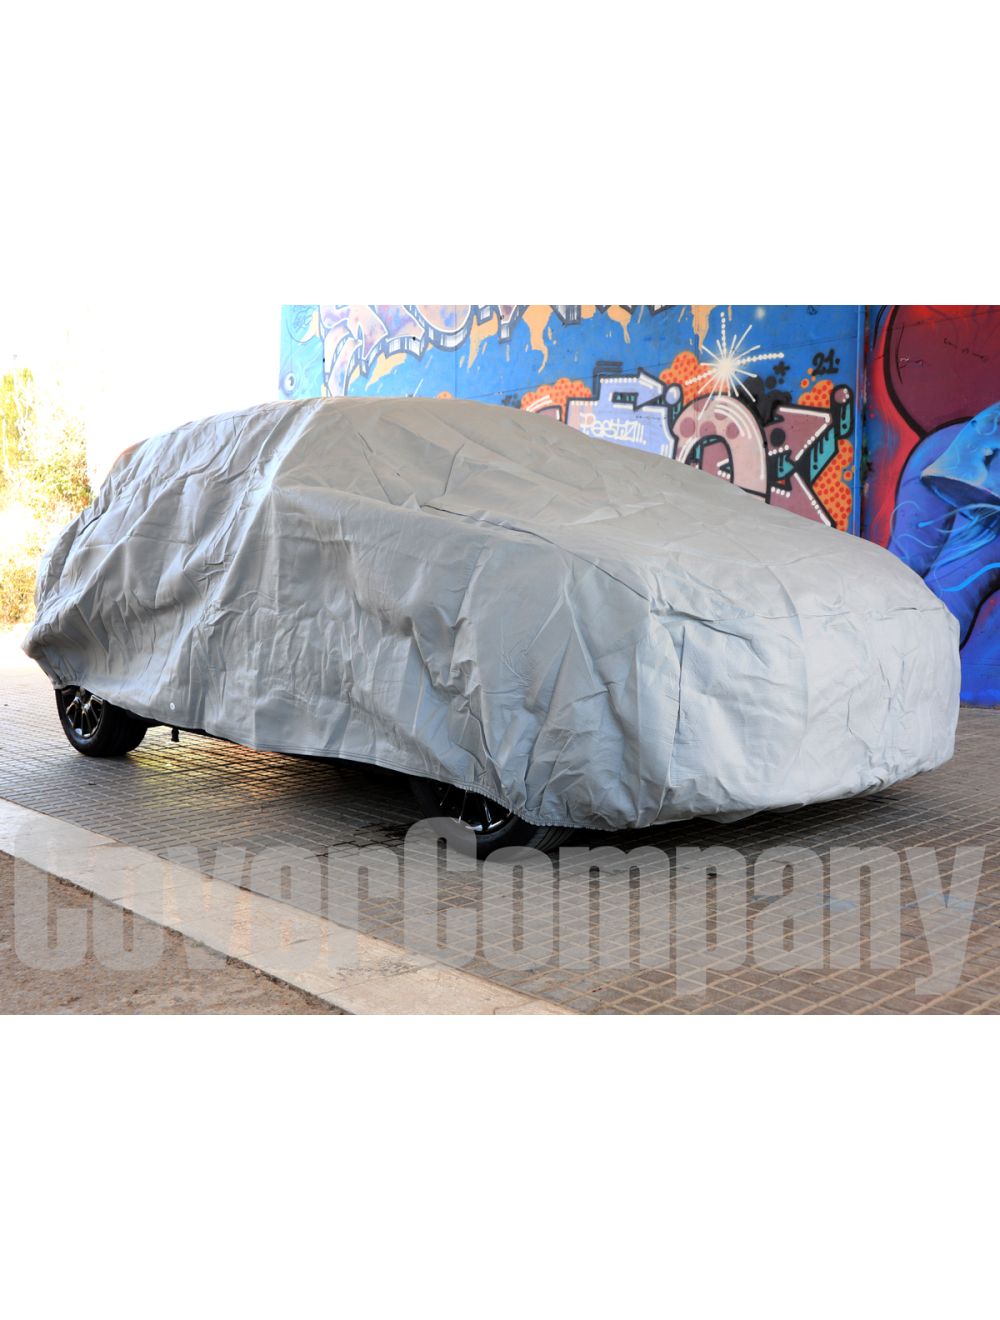 Housse Abarth Imperméable - Cover Company France